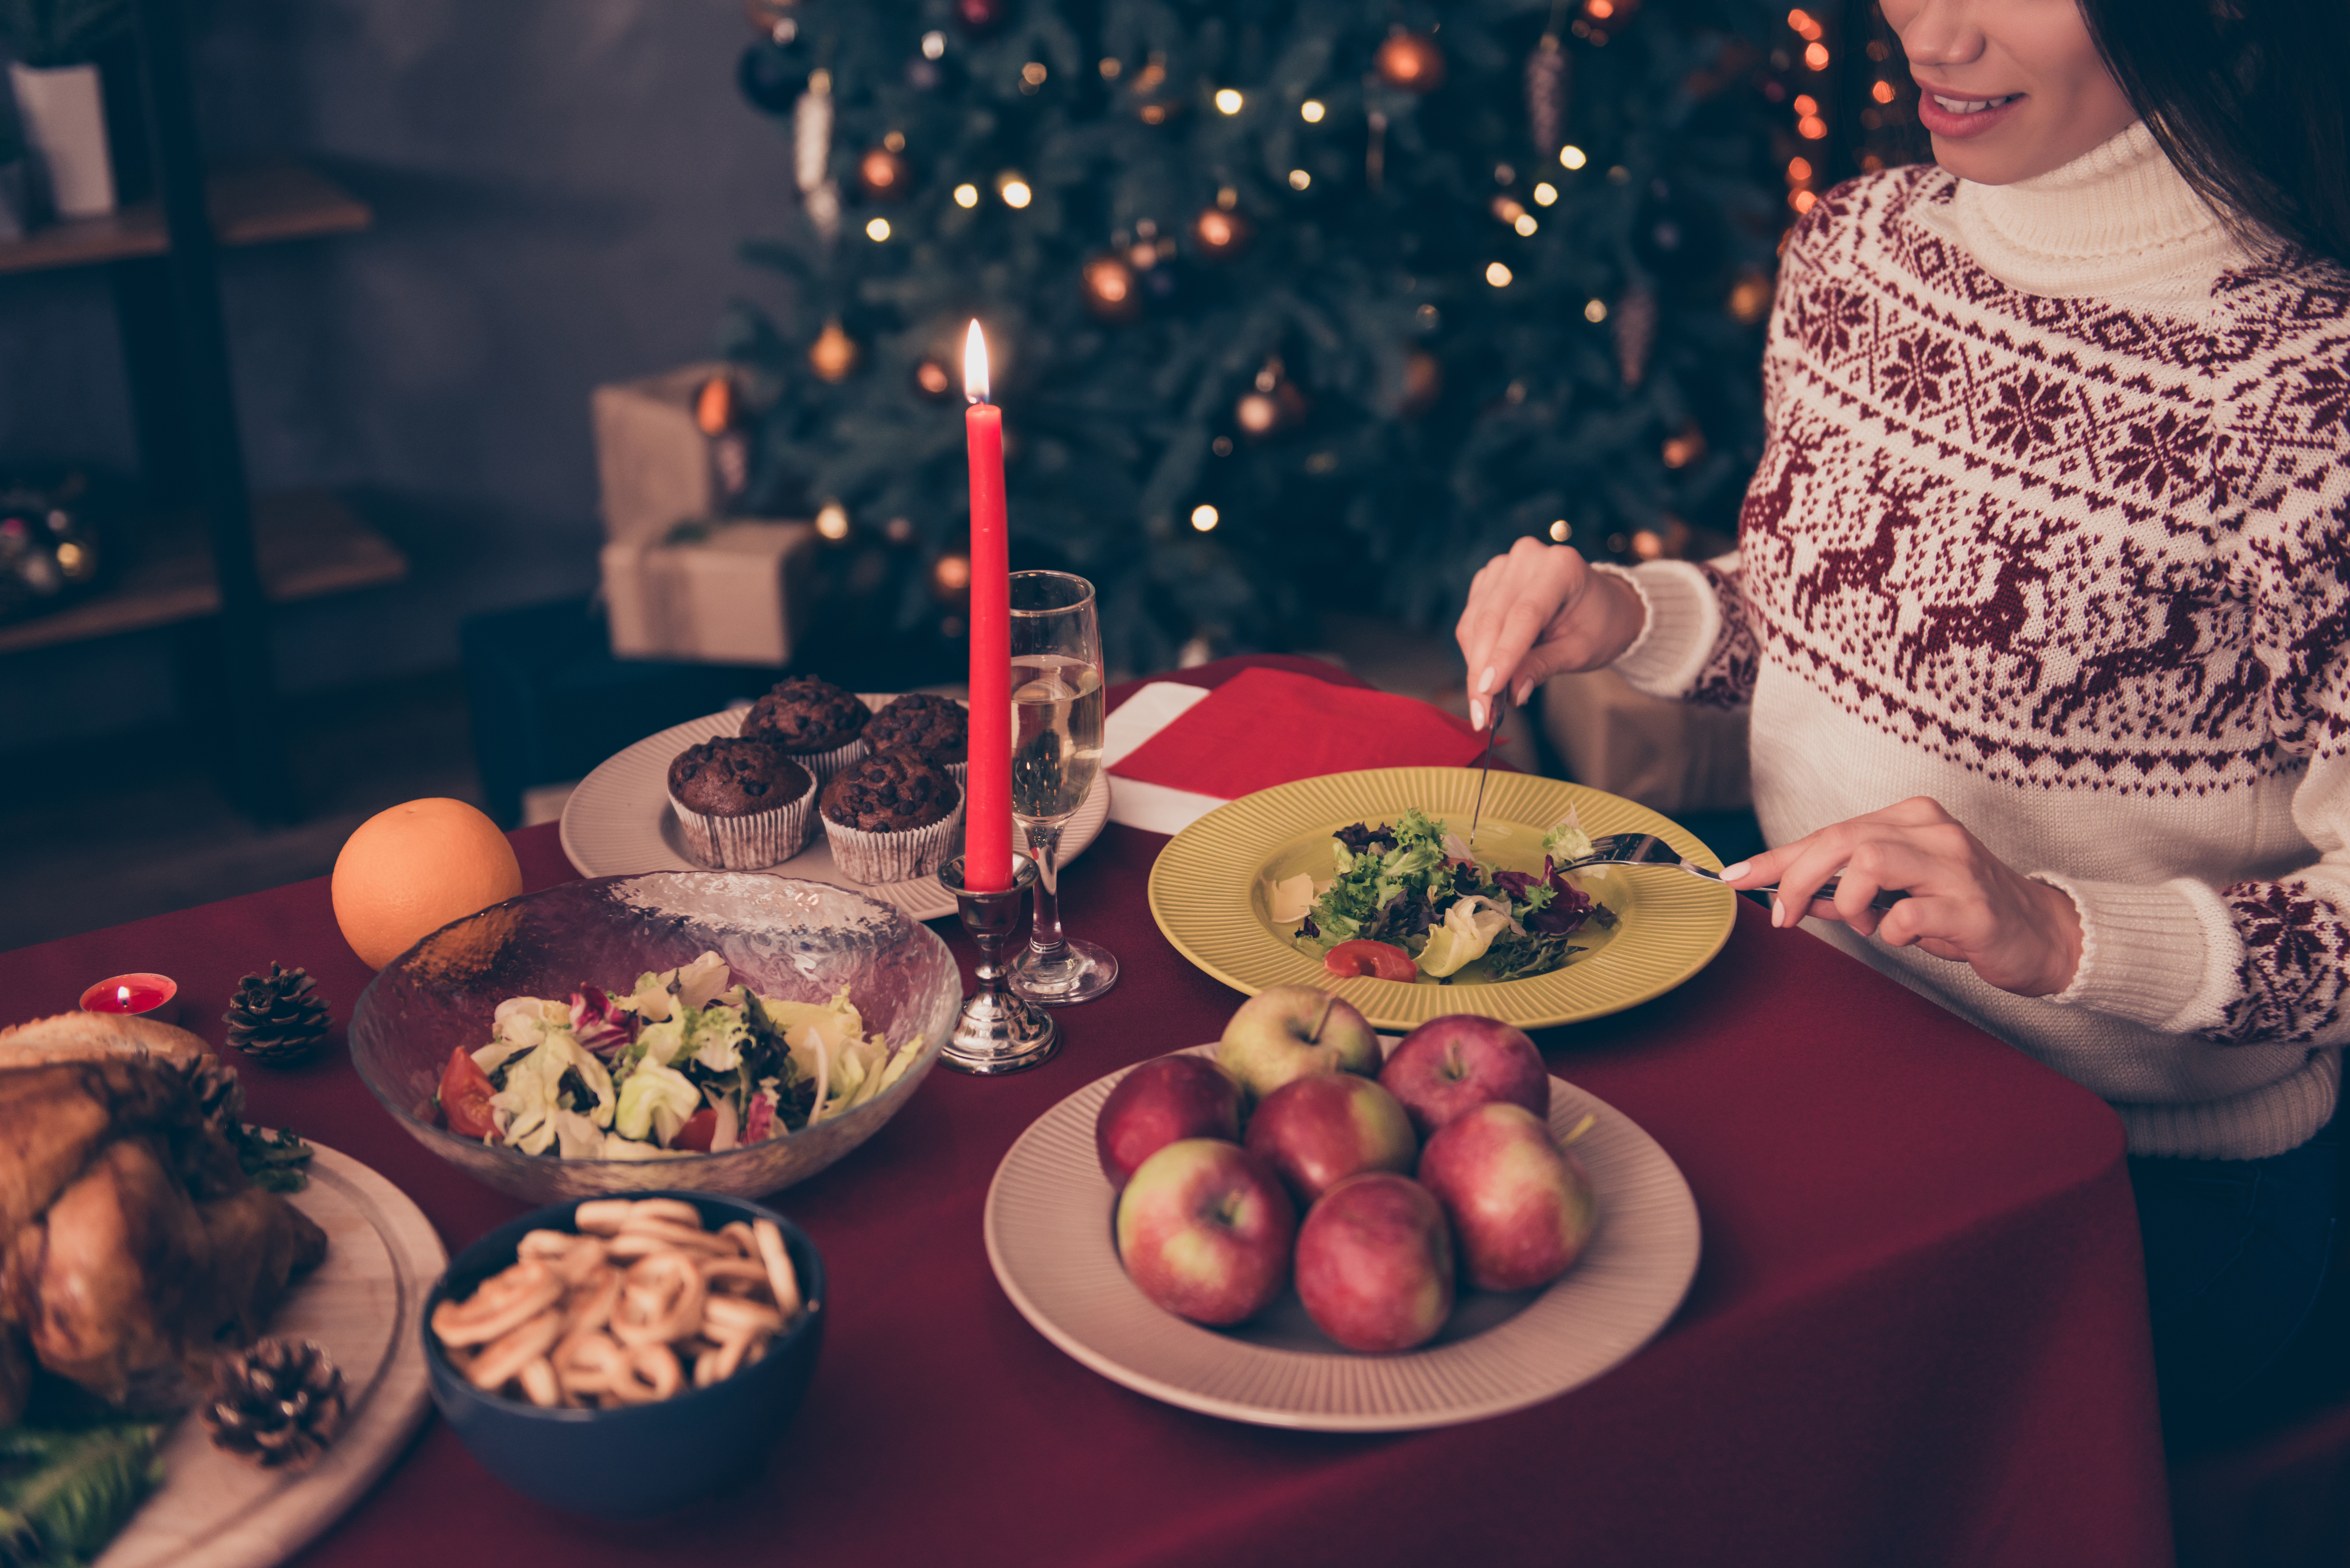 A woman eating a salad at Christmas dinner | Source: Shutterstock